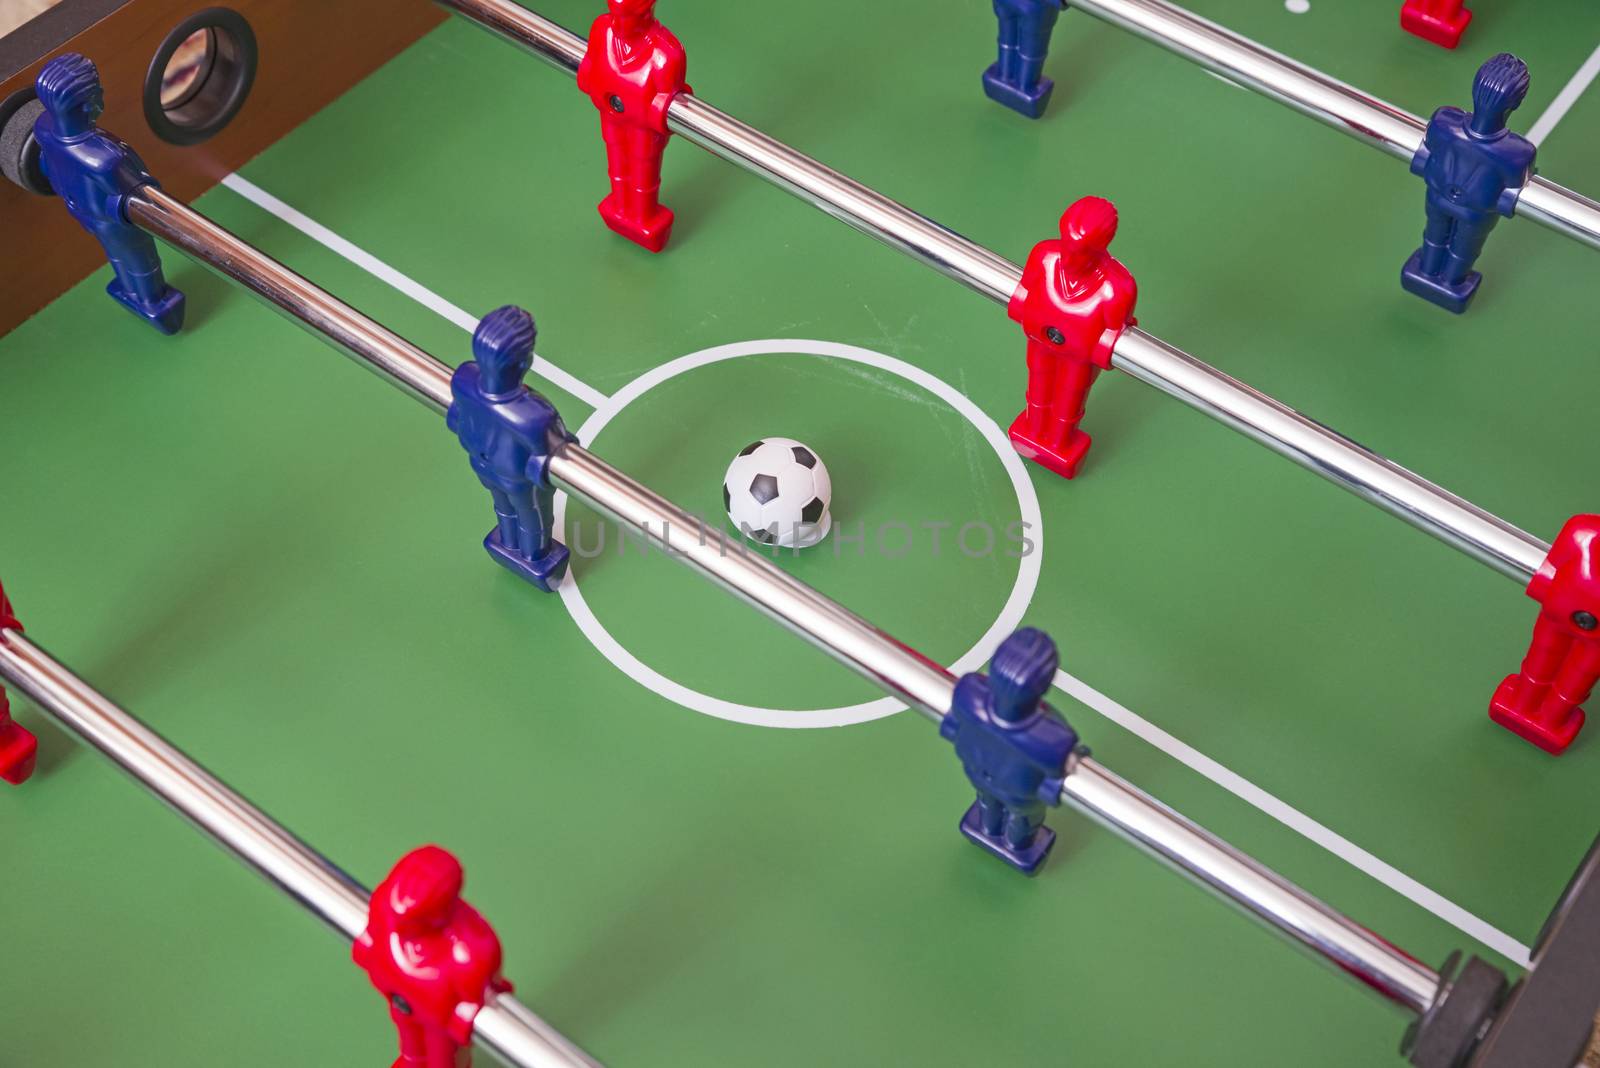 Soccer table game for kids by savcoco